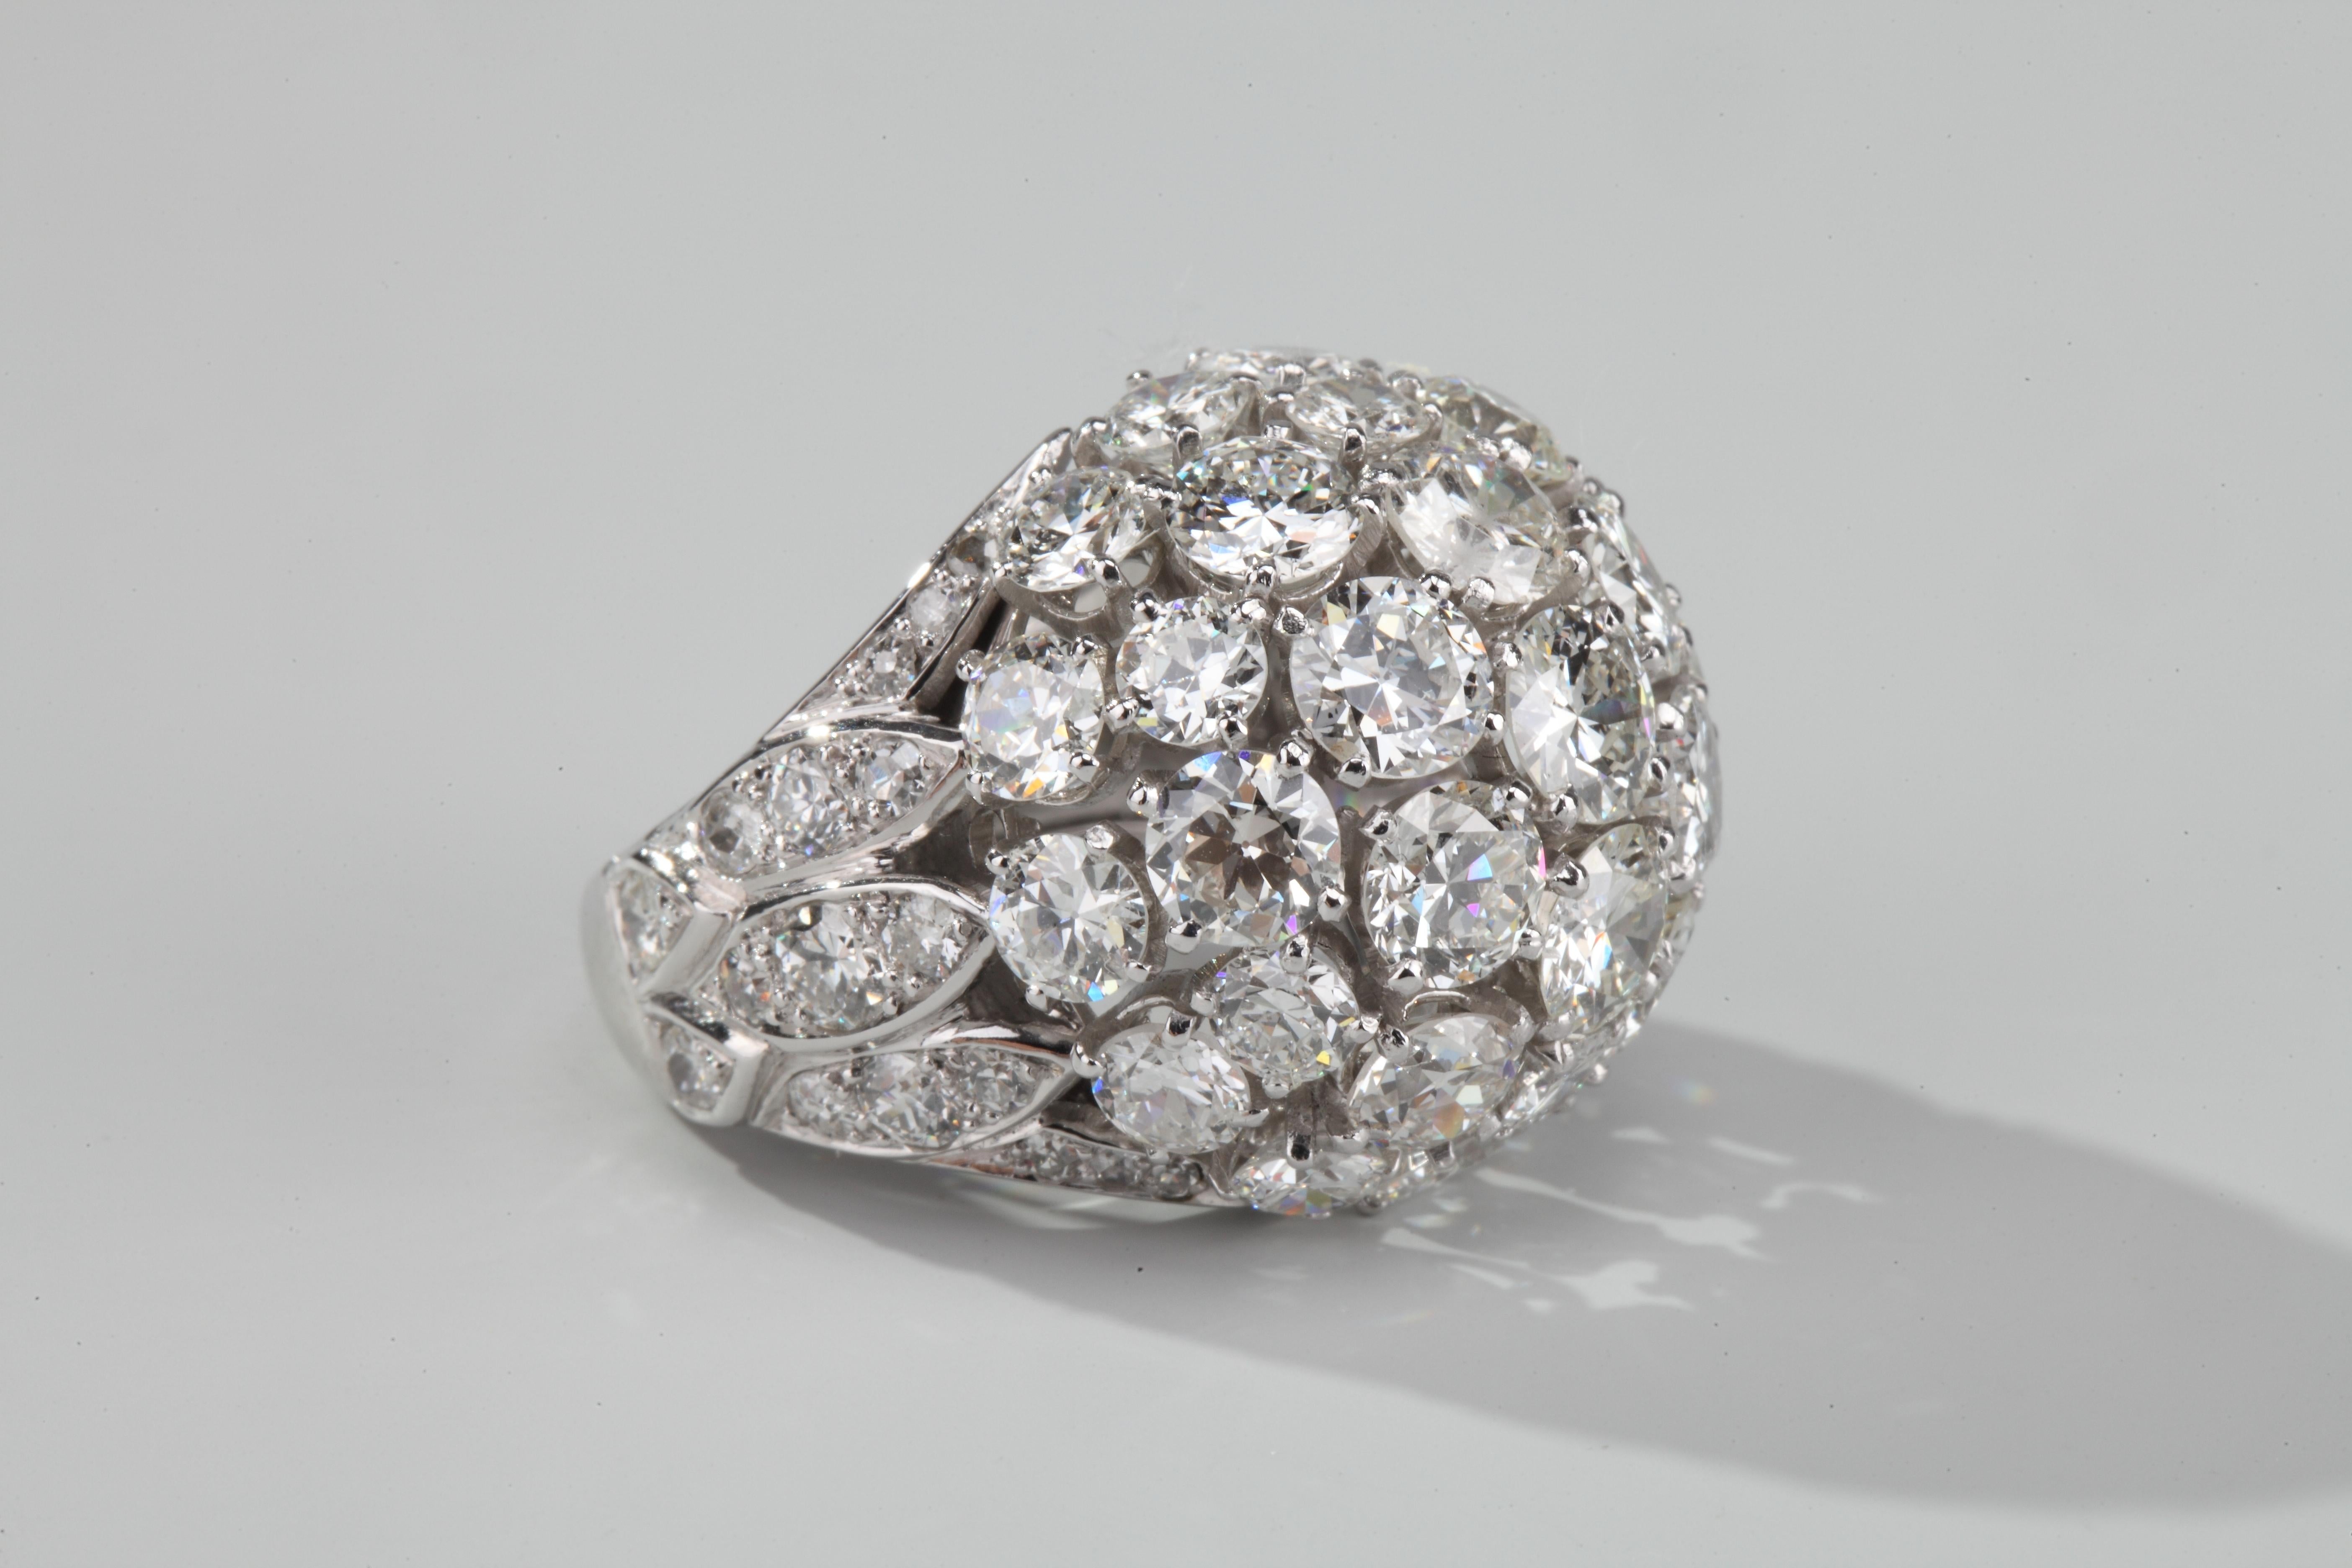 Beautiful platinum cocktail dome ring set with brillant-cut diamonds.
Weight of diamonds around 7.5 ct F-G vs color.
Circa 1950.
Size US 5,5-6 with inner circle.